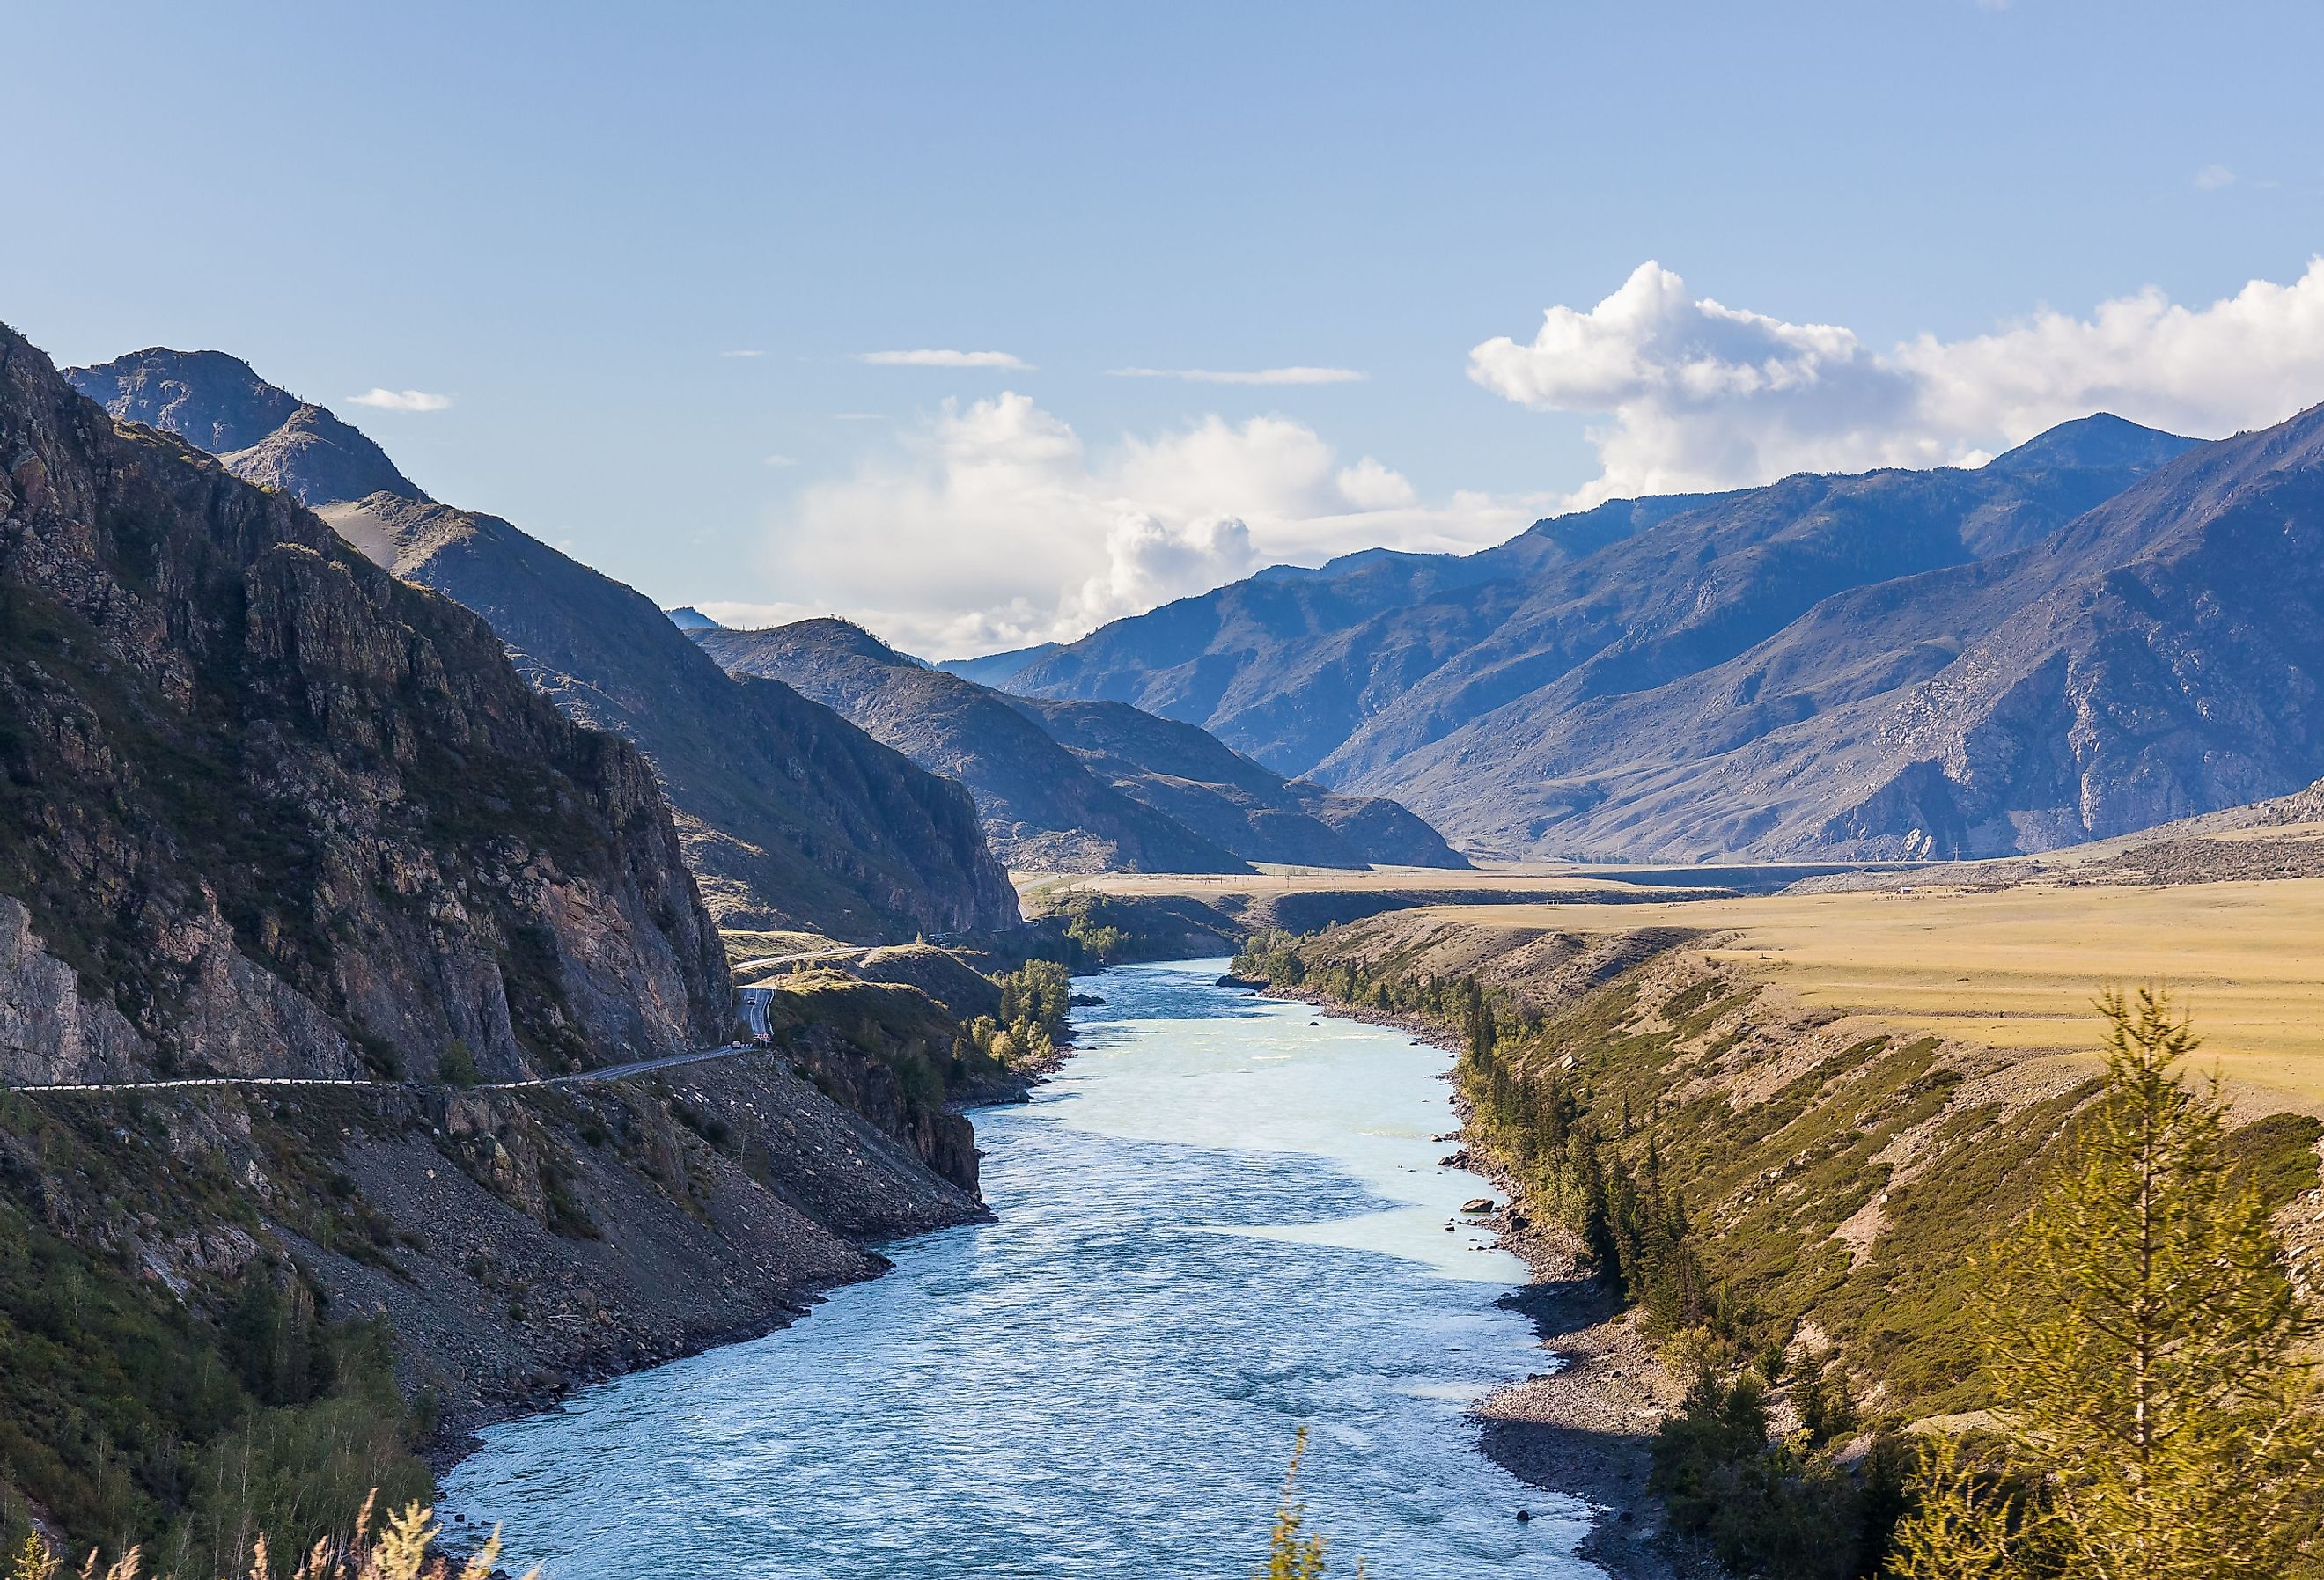 White mountain river in Altai. Altay where Russia, China, Mongolia, and Kazakhstan come together, and where the rivers Ob and Irtysh have their headwaters. Image credit saltat007 via Shutterstock. 